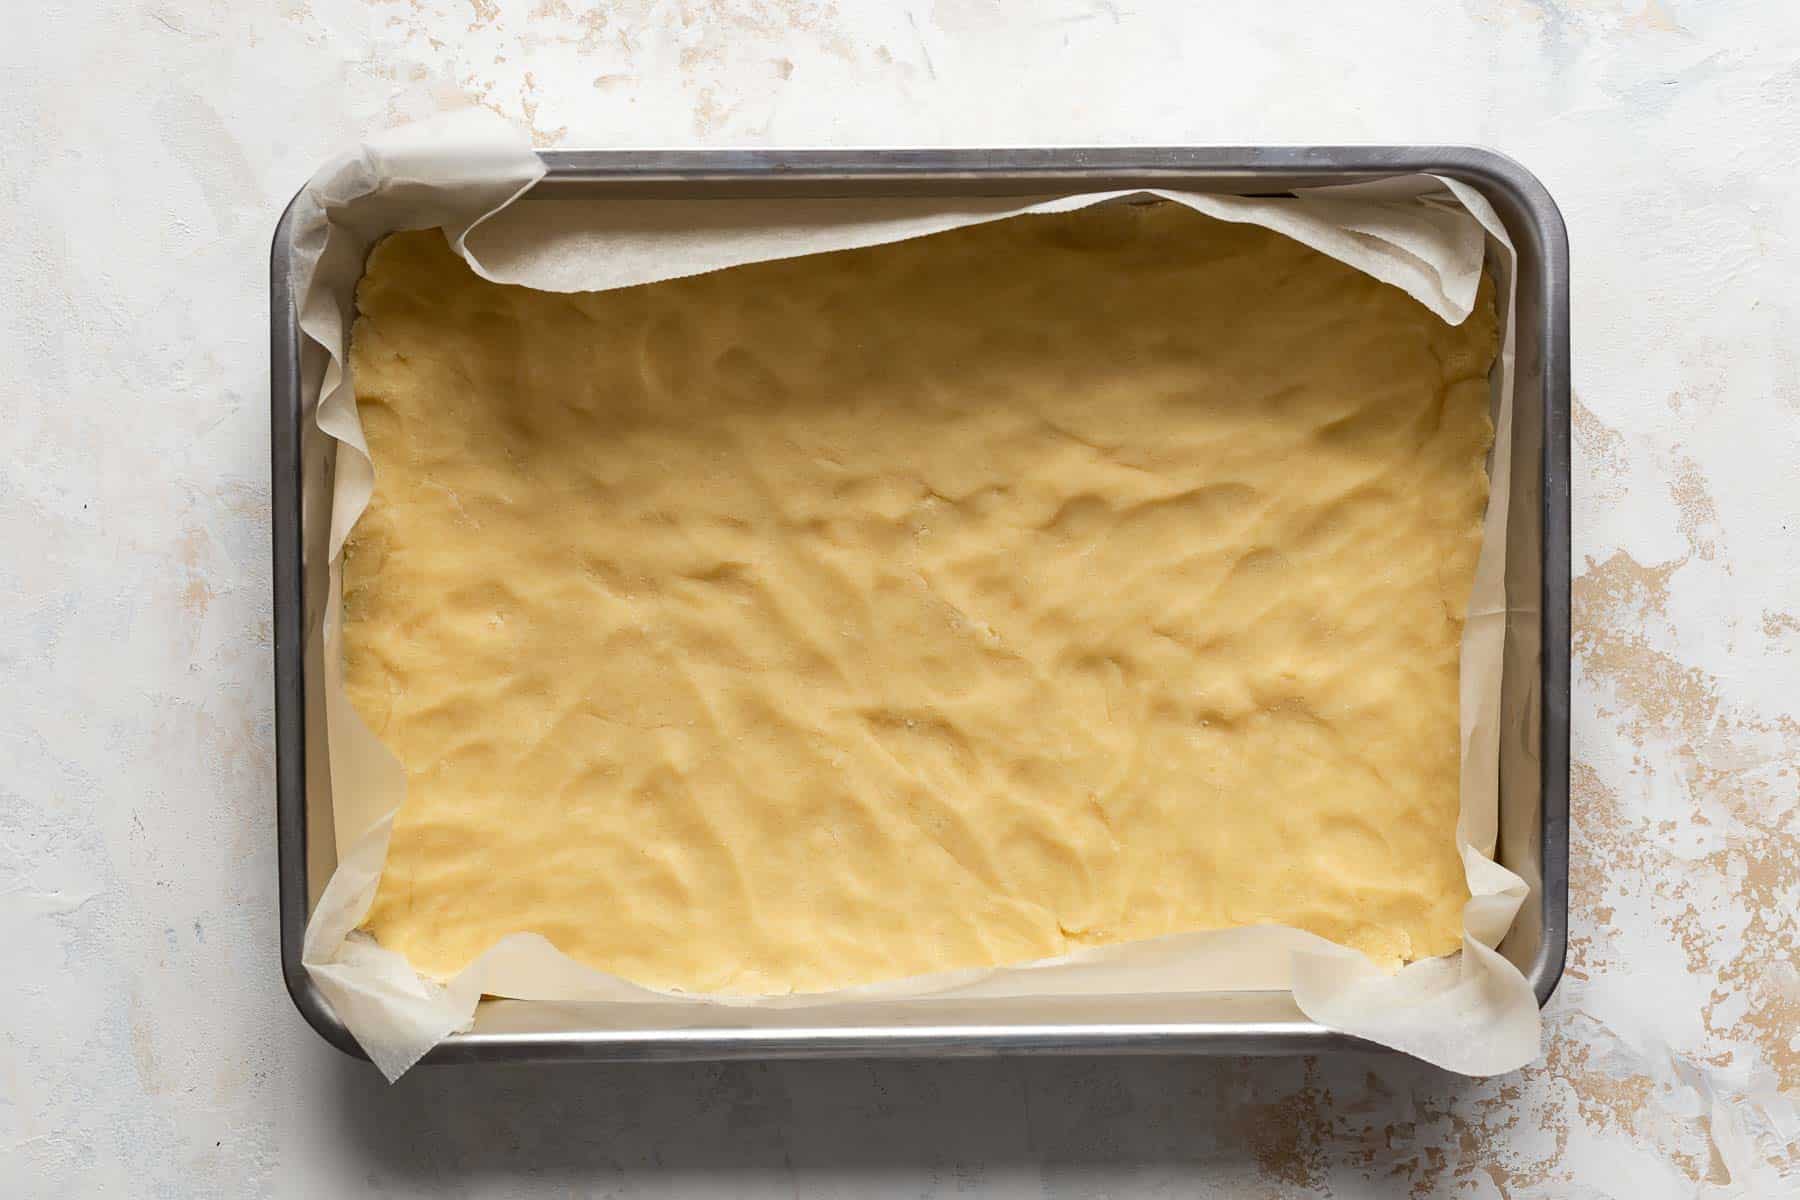 a layer of raw shortbread crust in a baking pan